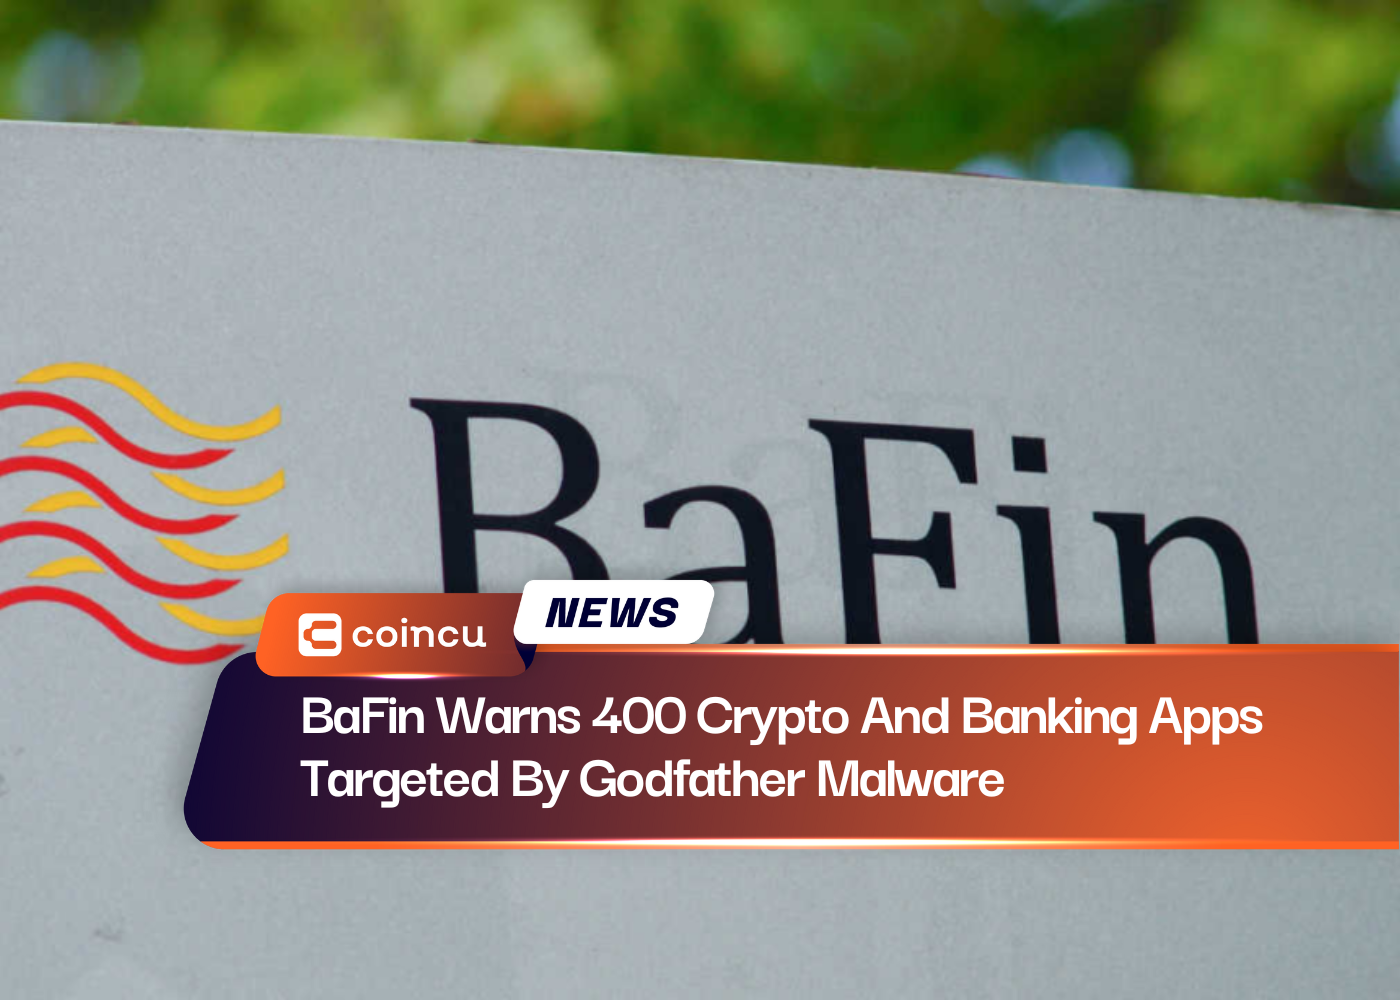 BaFin Warns 400 Crypto And Banking Apps Targeted By Godfather Malware